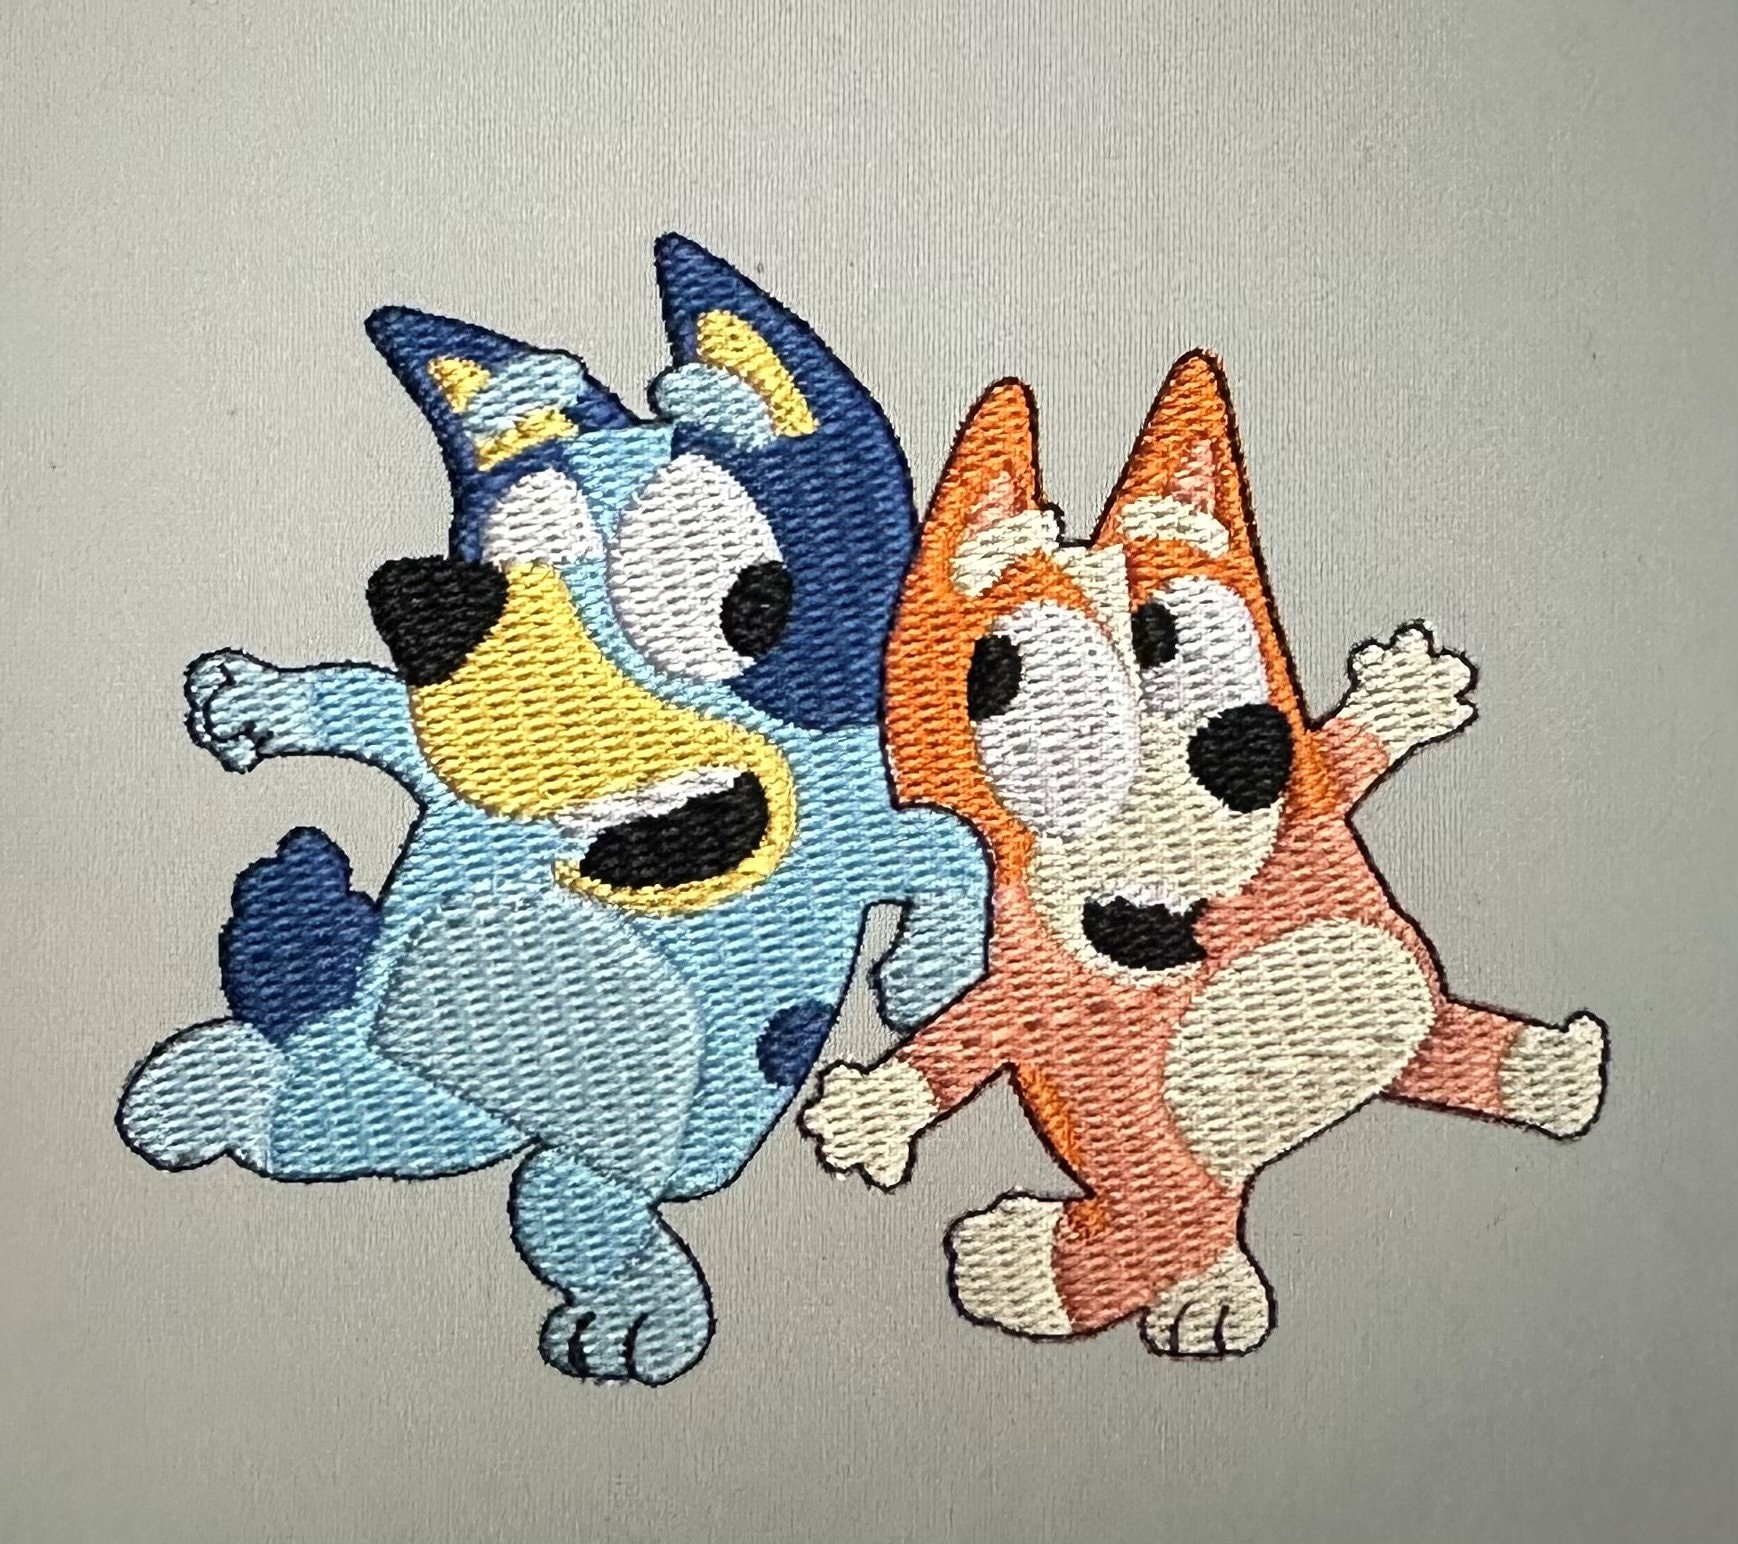 DIGITAL FILE ONLY - Perler Bead Pattern for Bluey and Bingo